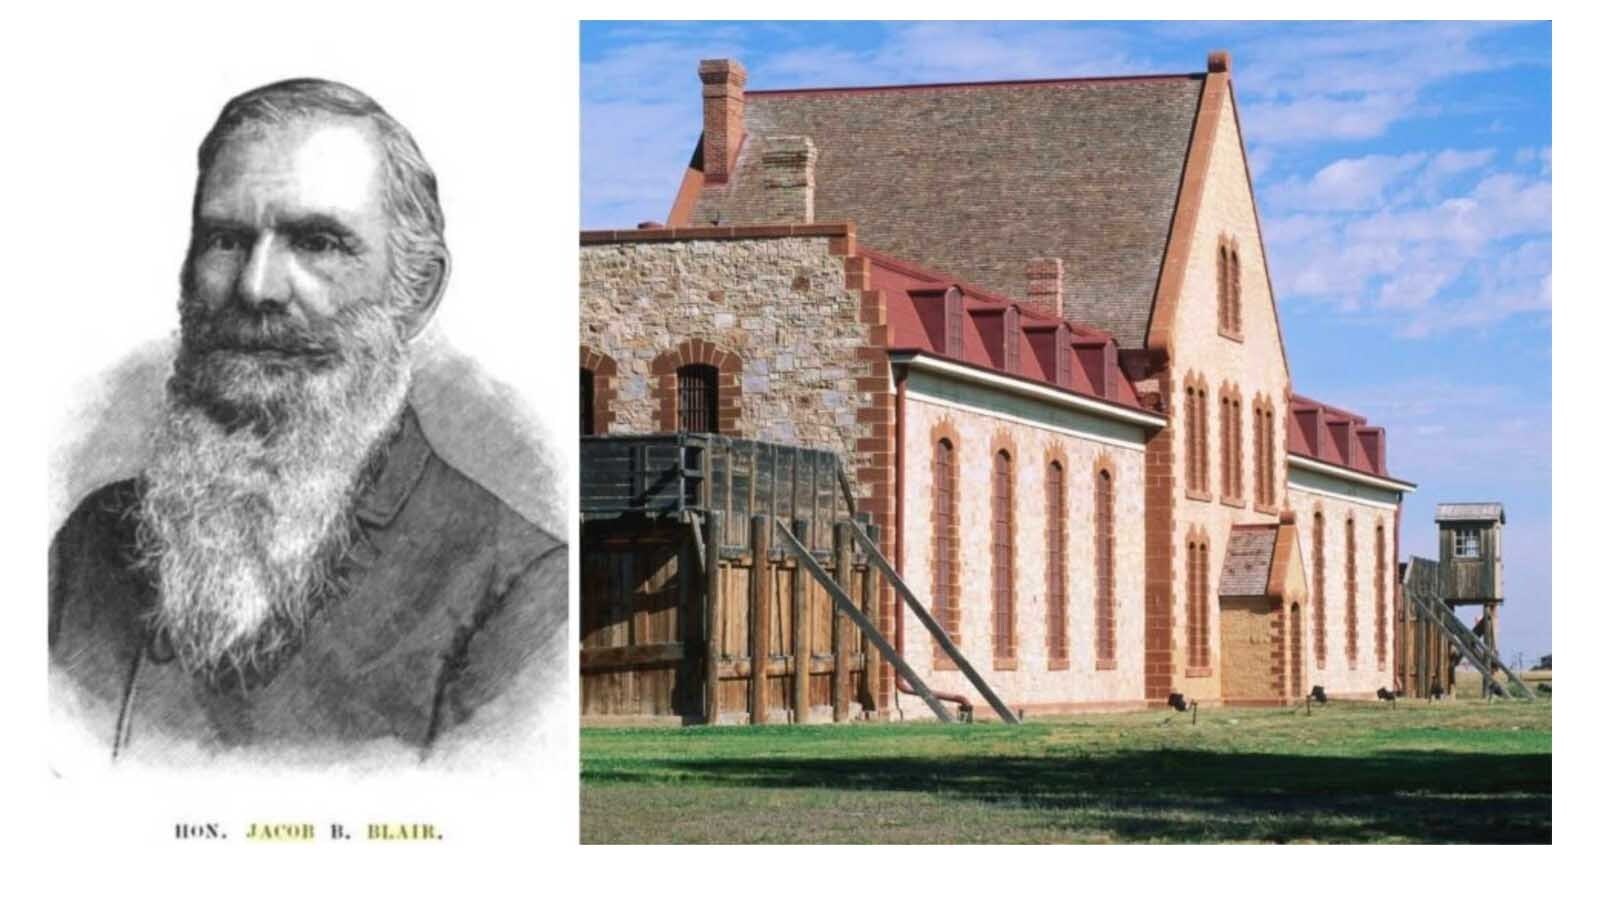 Many of the Wild West criminals who crossed paths with Judge Jacob Blair found themselves at the Wyoming Territorial Prison in Laramie.